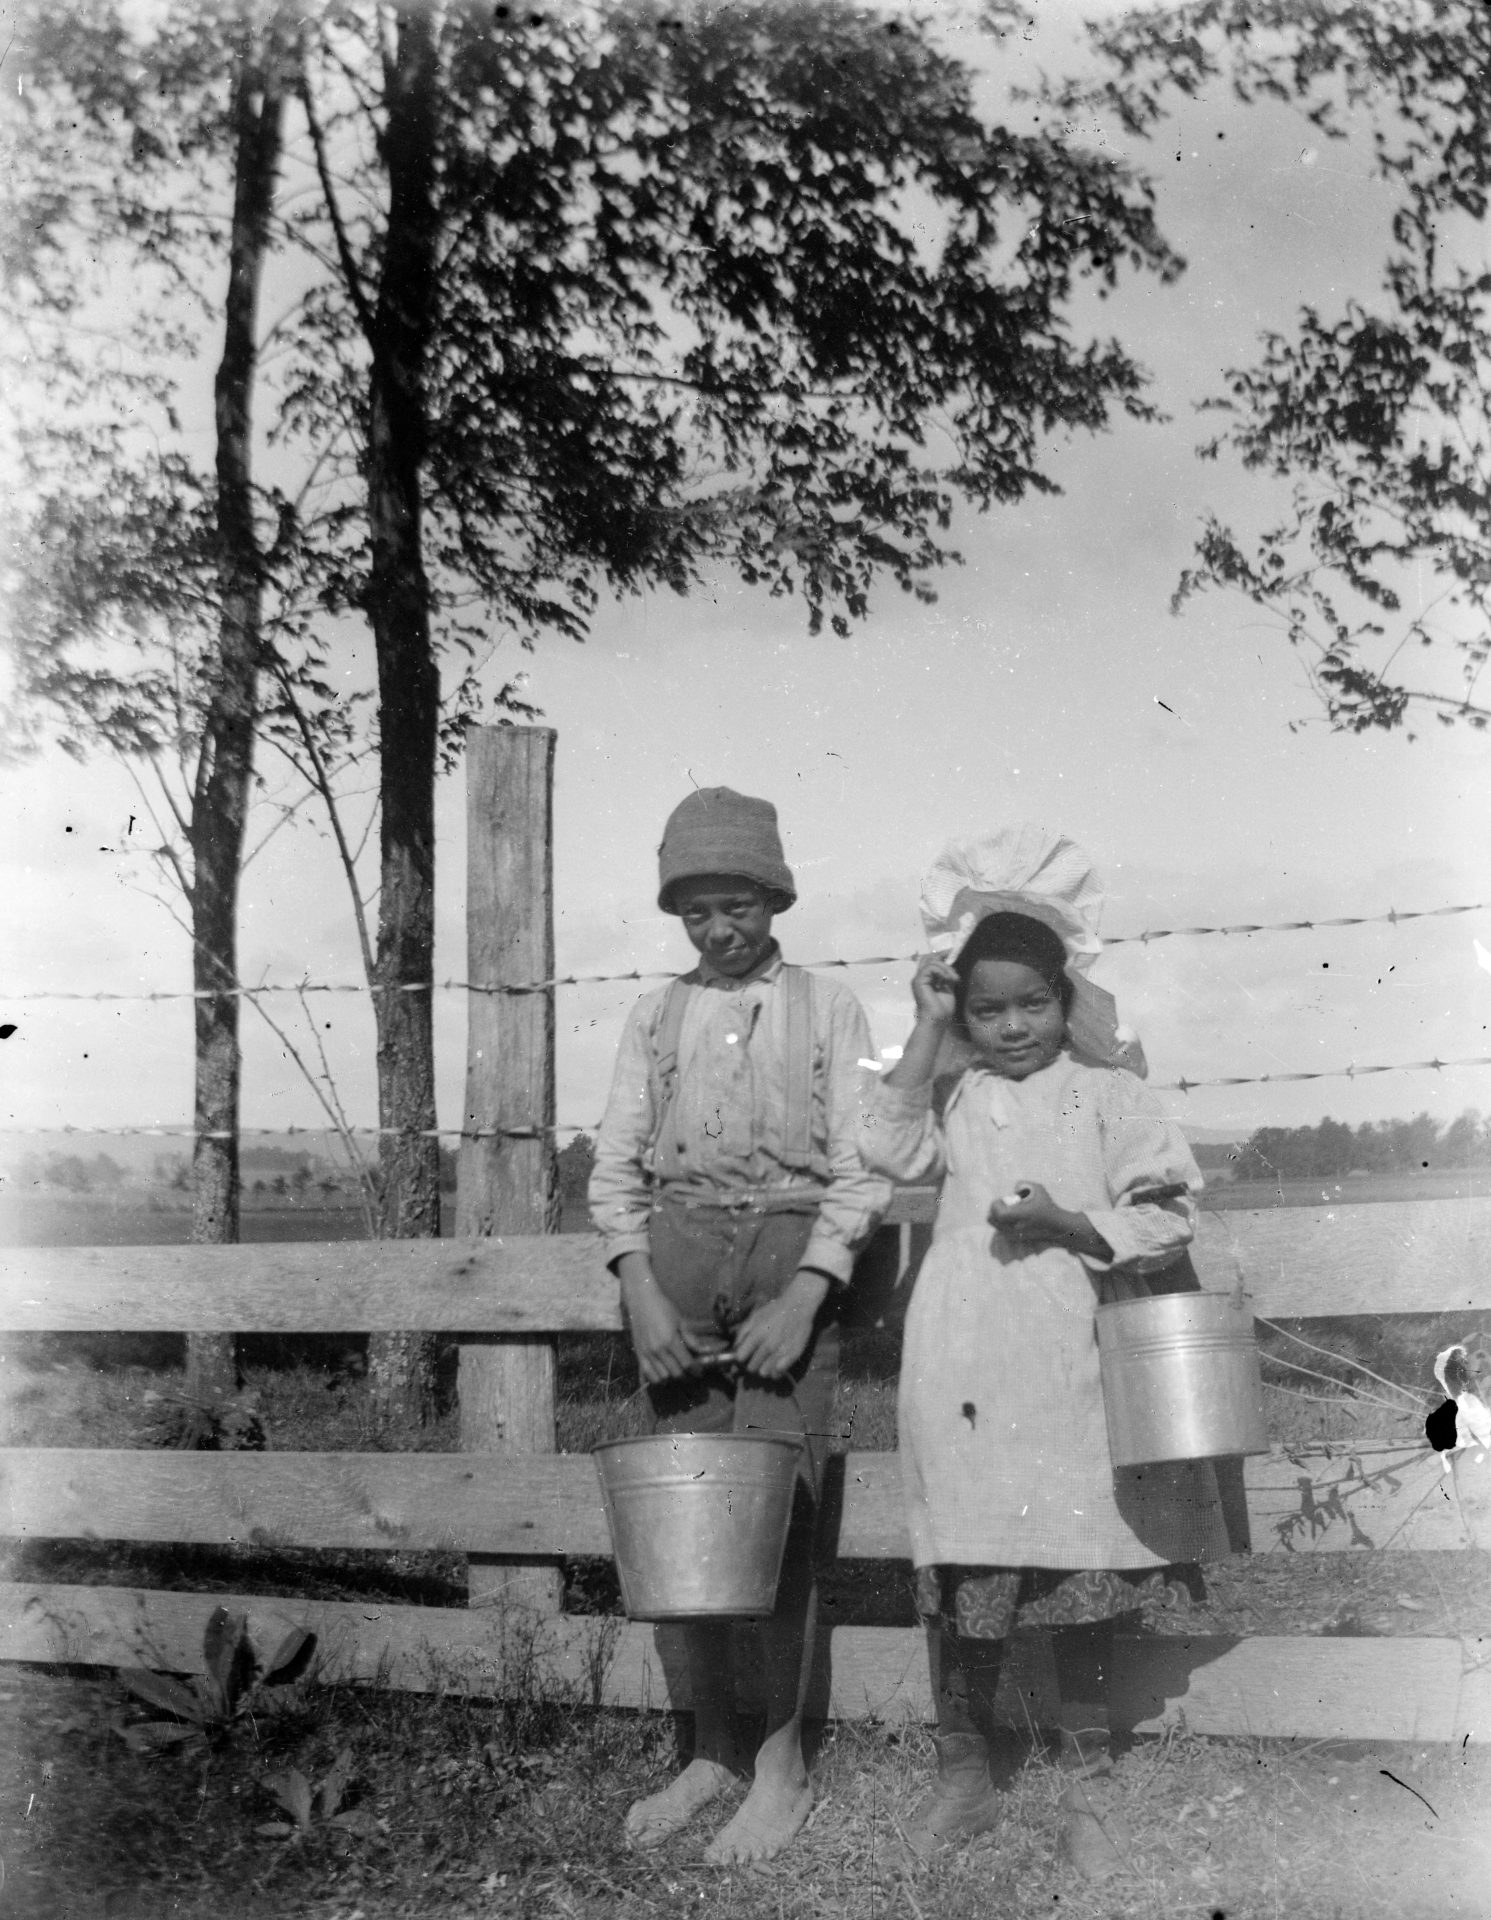 An African American boy and girl hold milk pails and pose in front of a fence.